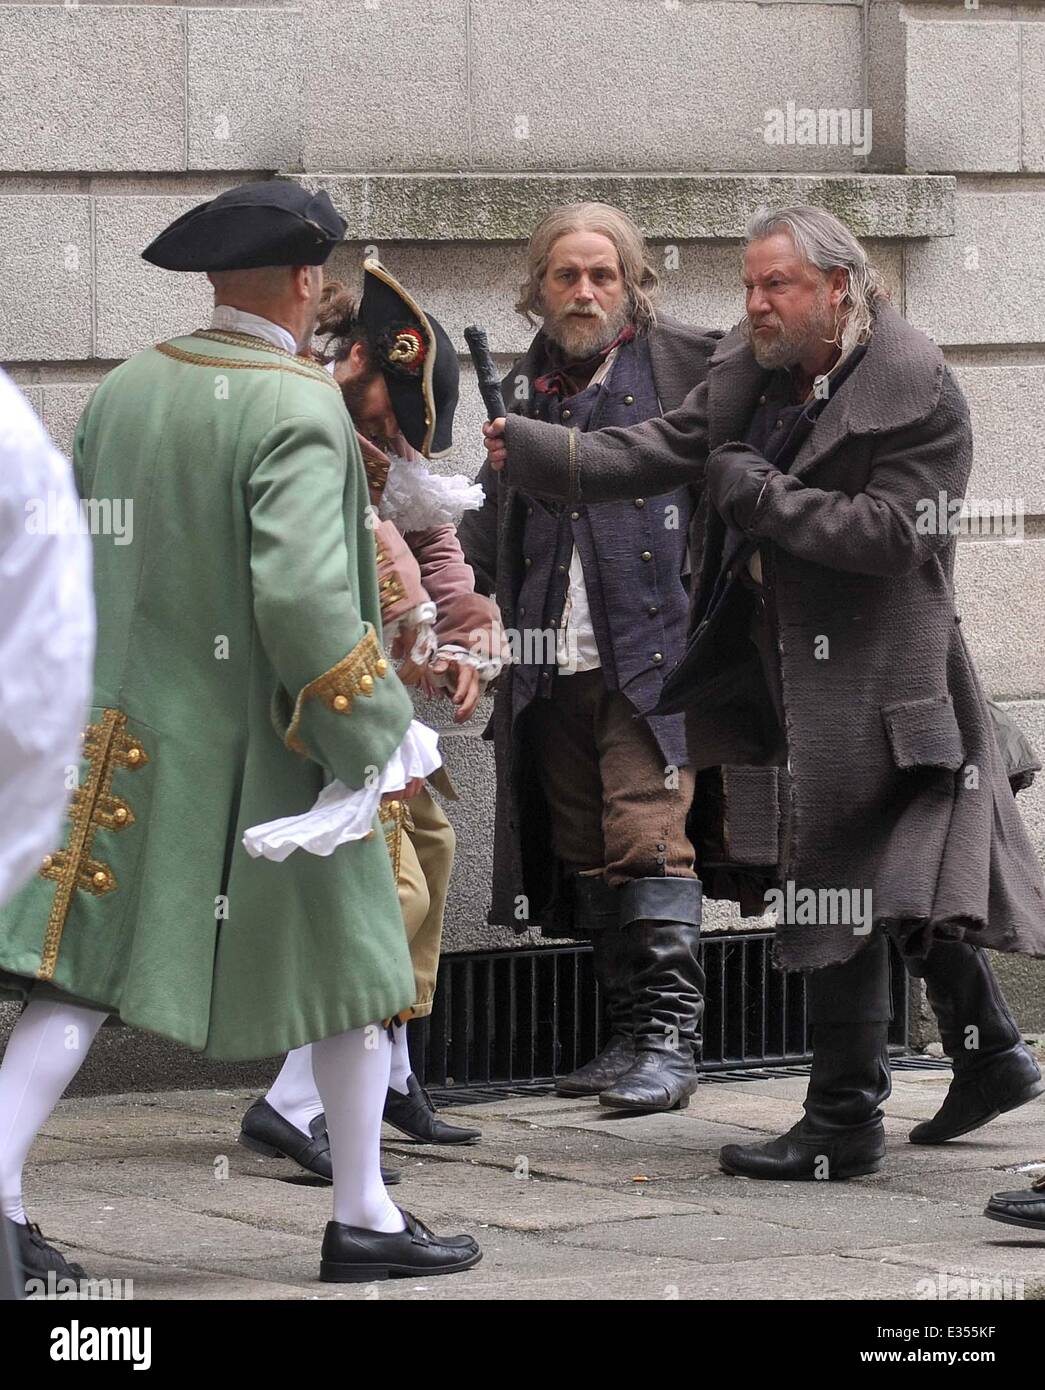 Actors Ray Winstone,Aneurin Barnard and Actor/Comedian Omid Djalili filming Sky TV's new Drama MoonFleet today at Kings Inn.Todays scene was a fight scene where Winstone and Barnard jump out of a window and are then involved in a fight.Winstone and Barnard also had a joke fight between takes while Omid Djalili played football with a stone rock from props.  Featuring: Stunt Doubles Where: Dublin, Ireland When: 25 Jun 2013  **Not available for publication in Irish Tabloids or Irish magazines** Stock Photo